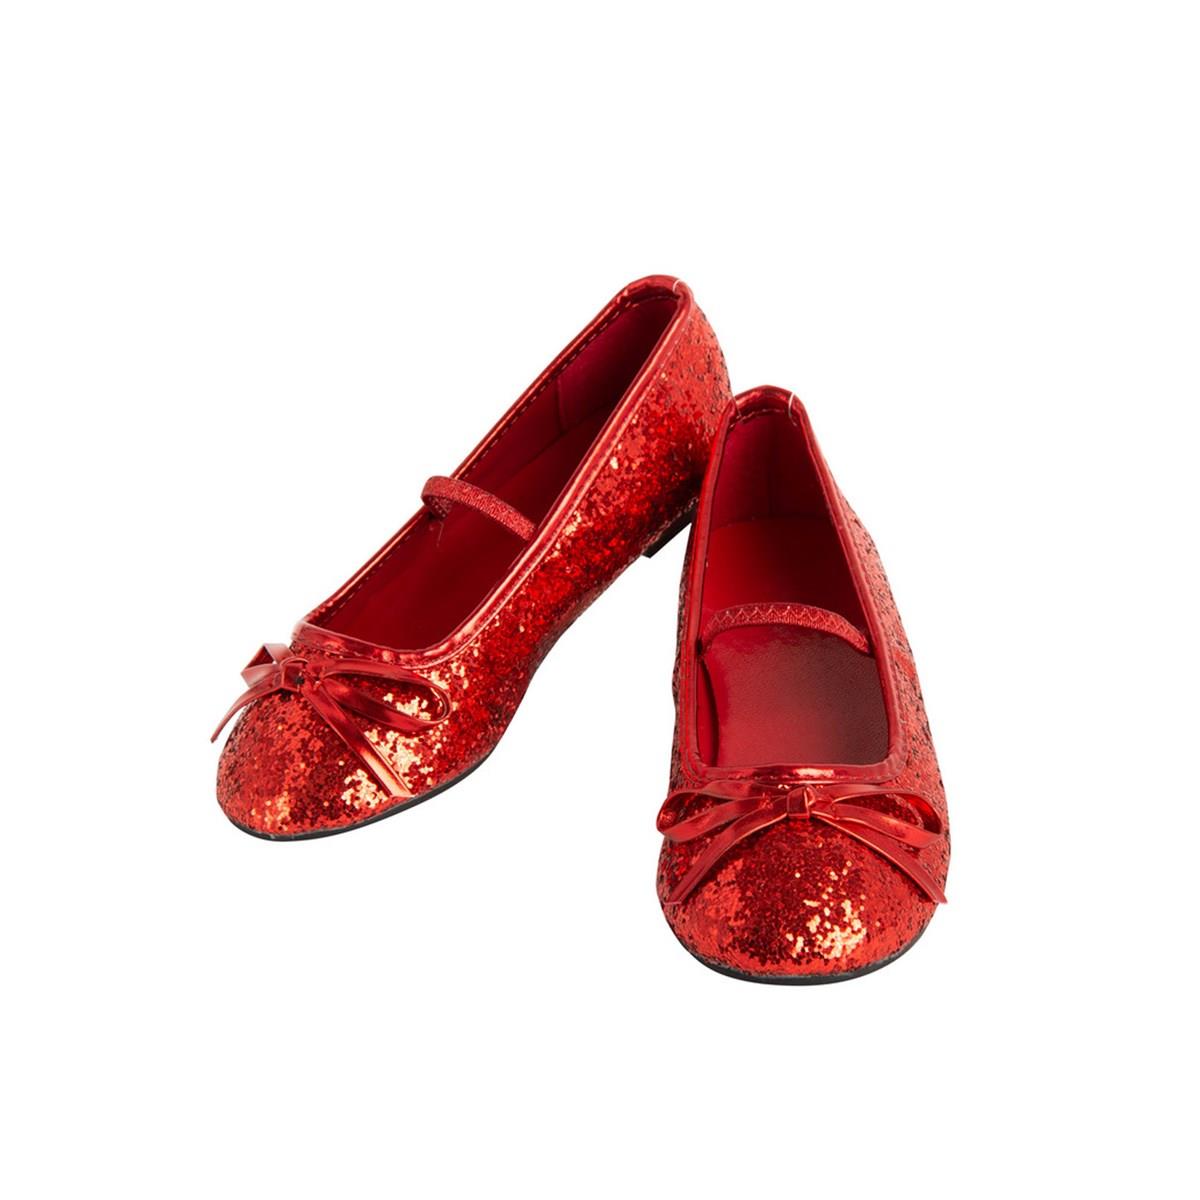 Picture of Rubies 278321 Girls Ballet Shoe - Red, Size 4-5